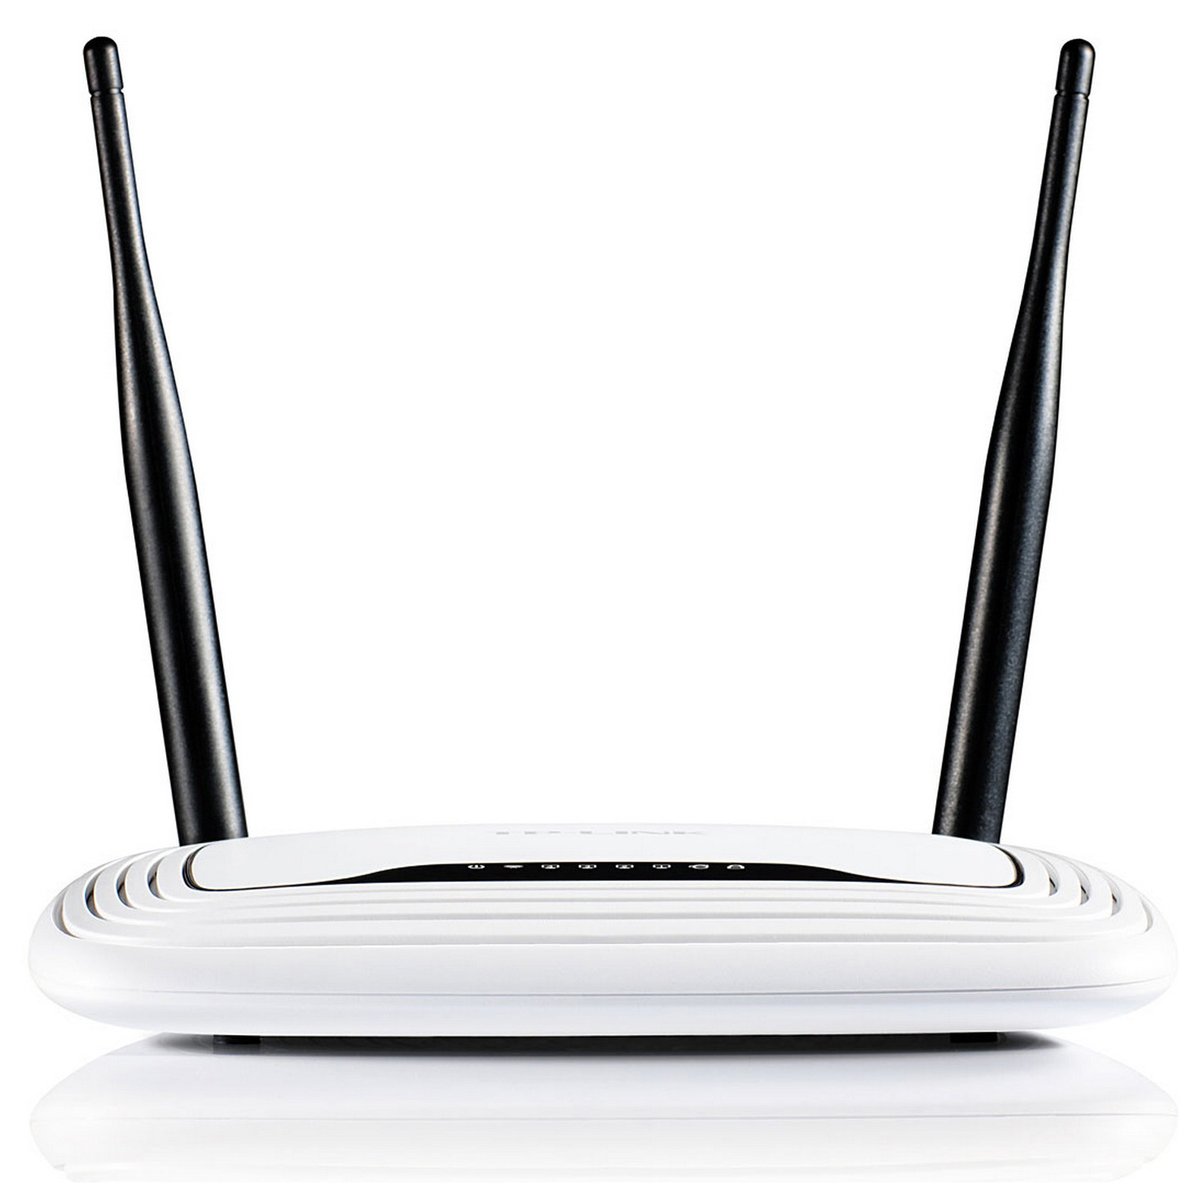 TP Link Wireless N300 Router TL-WR841N